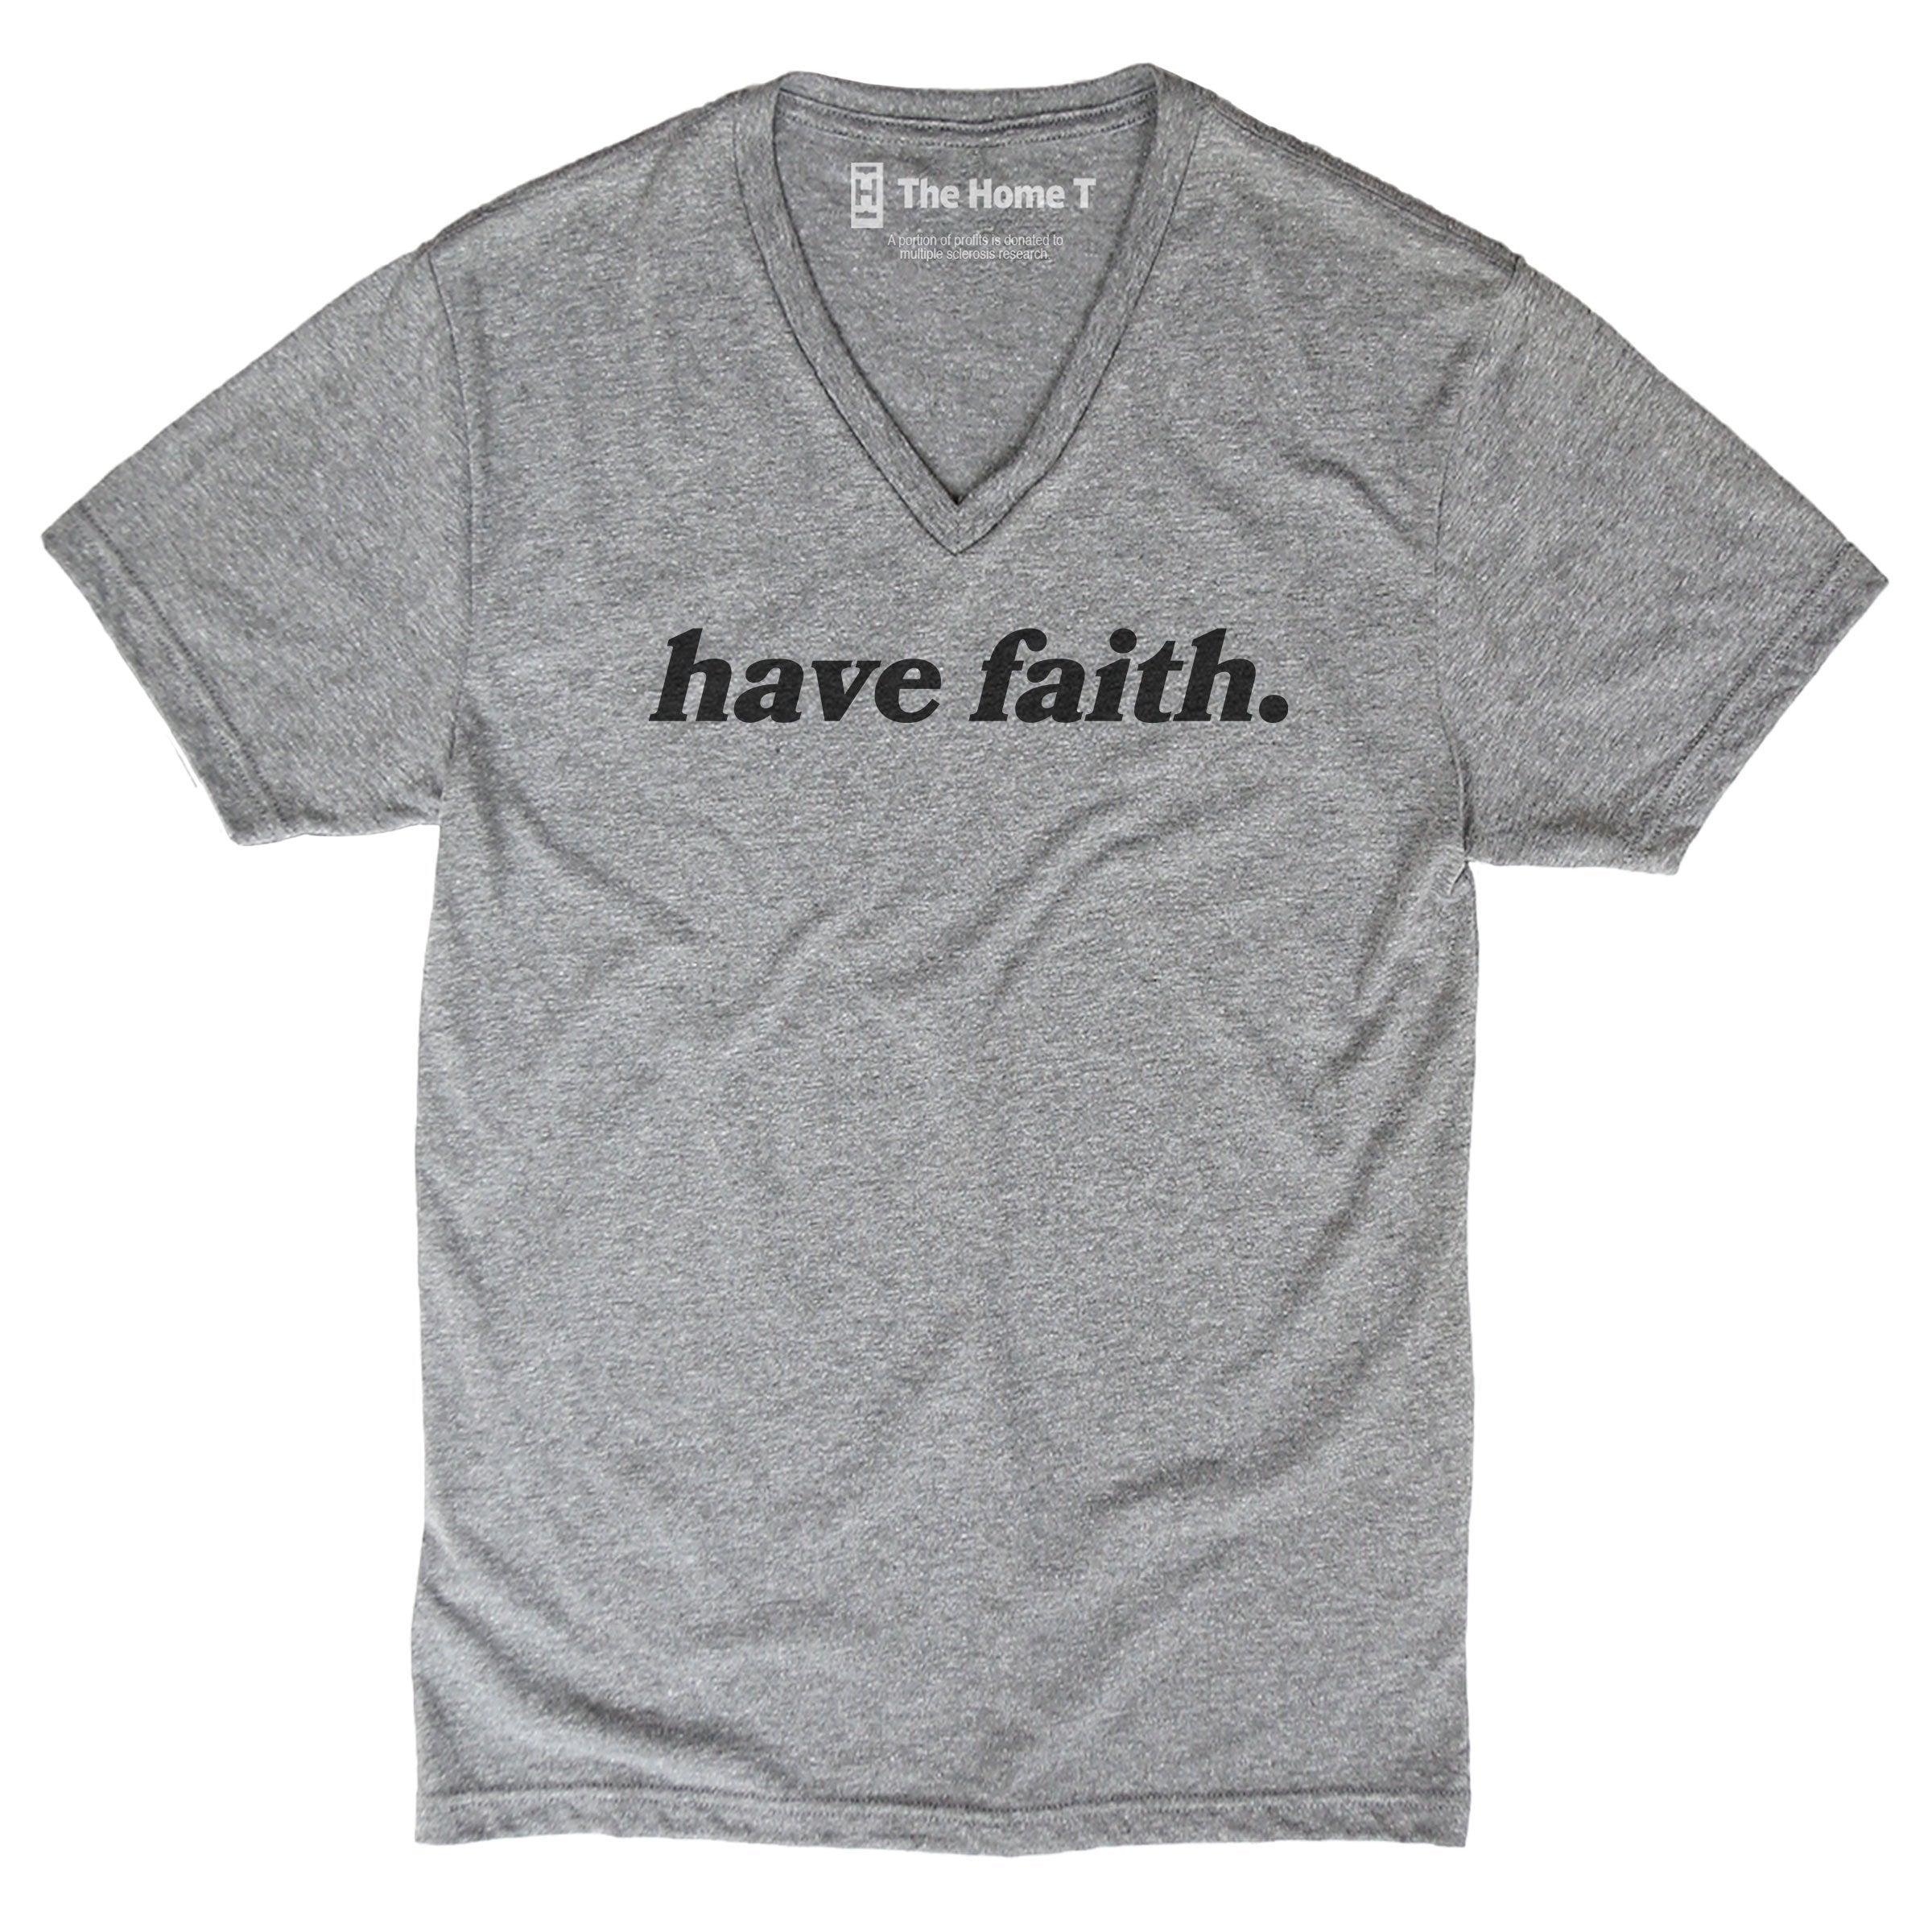 Have Faith. The Home T XS V NECK